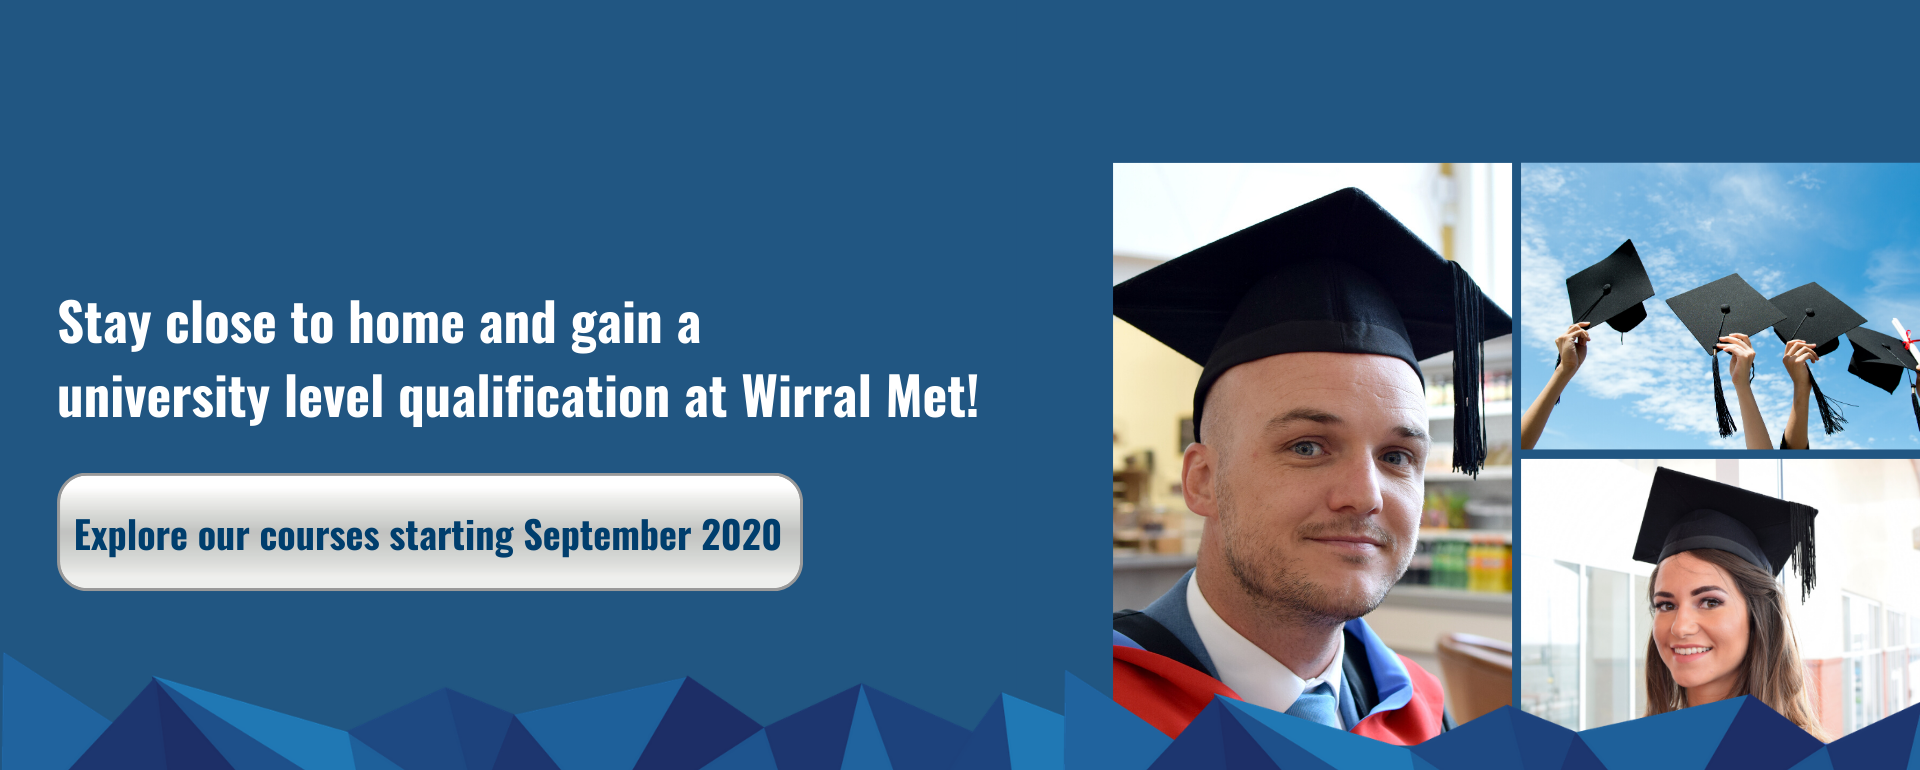 Wirral Met offer a wide range of Degrees, Foundation Degrees, Higher National Certificates and Diplomas (HNCs/HNDs) as well as teaching qualifications.